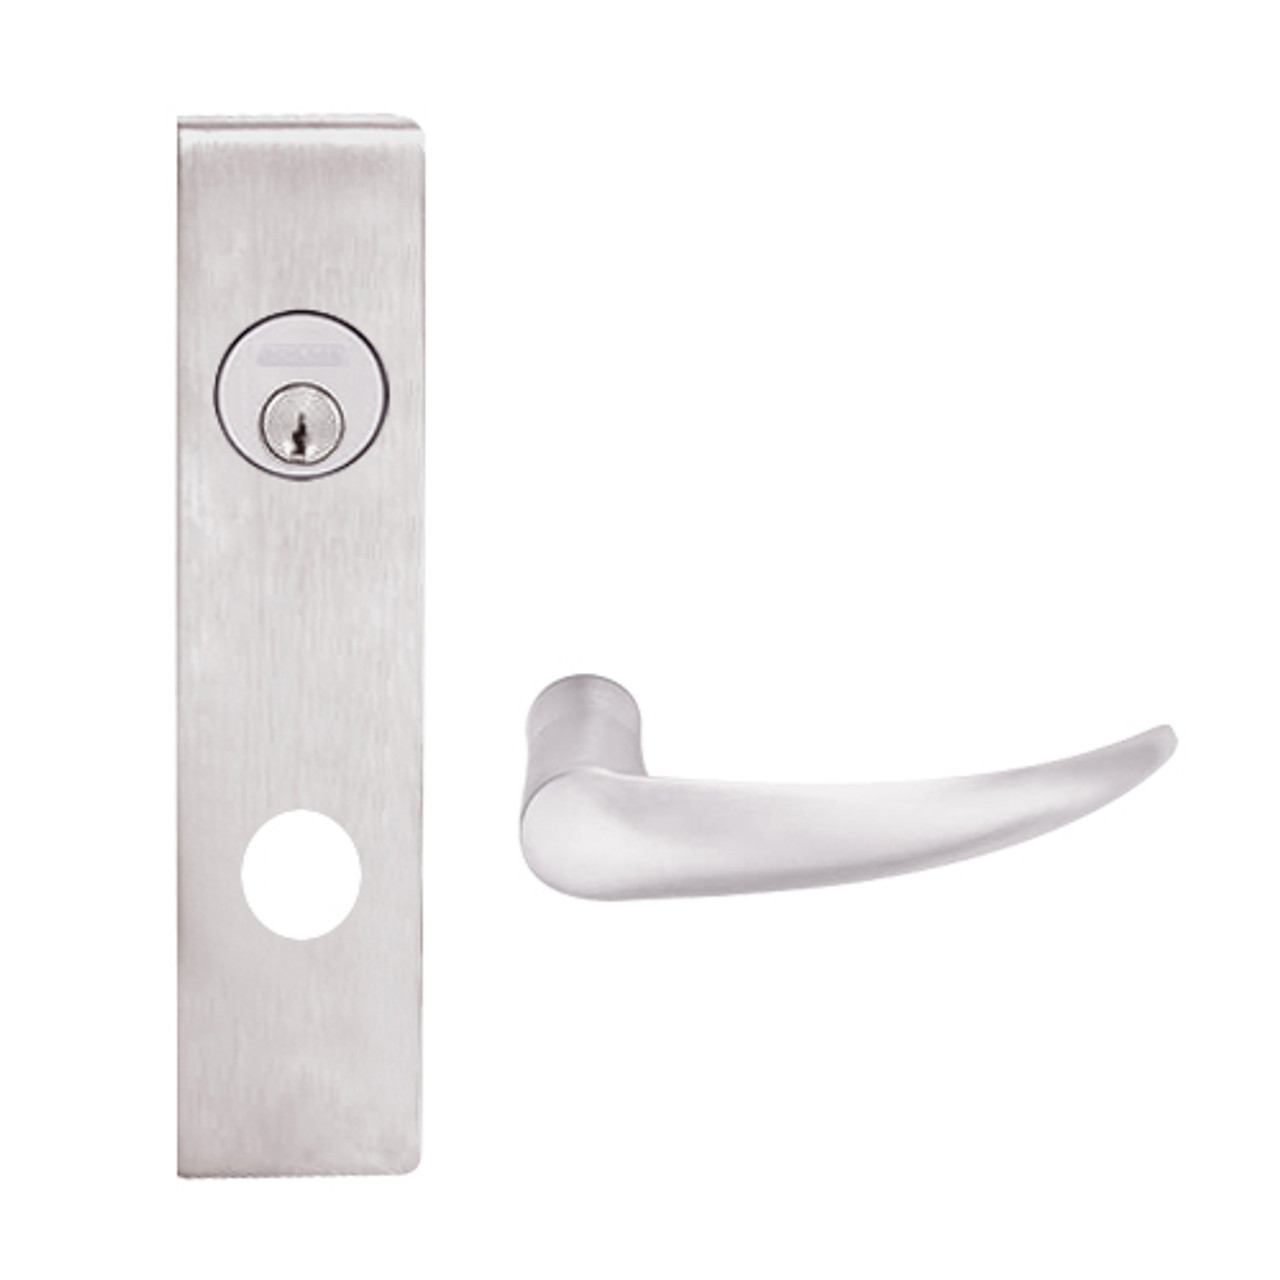 L9453L-OME-L-629 Schlage L Series Less Cylinder Entrance with Deadbolt Commercial Mortise Lock with Omega Lever Design in Bright Stainless Steel